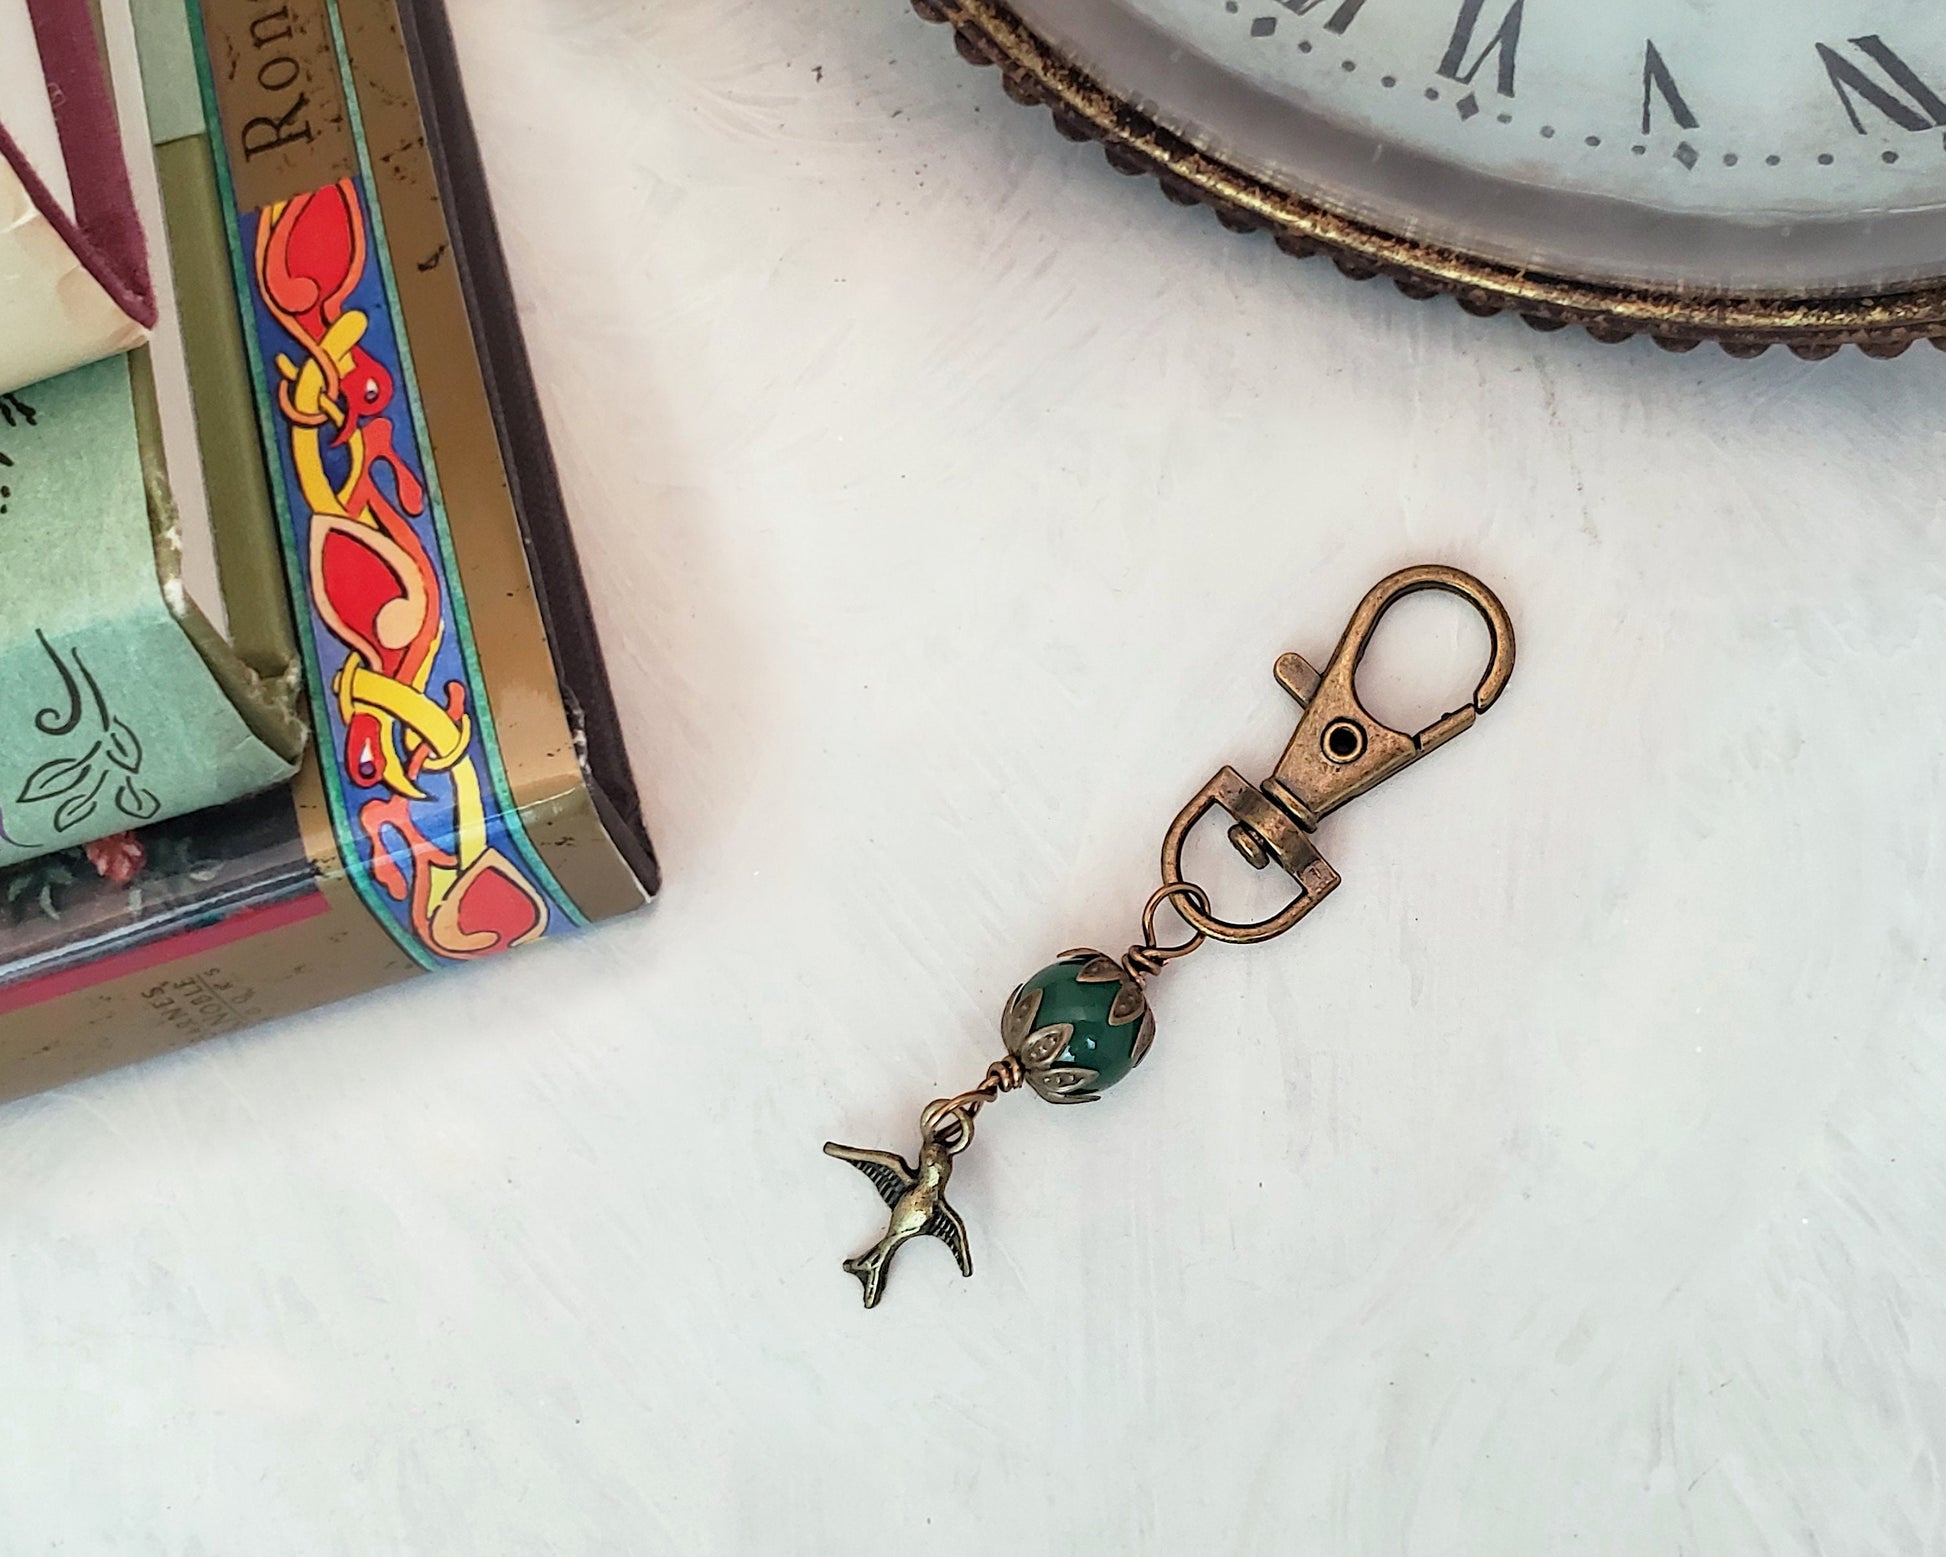 Wire Wrapped Clip or Purse Charm in Antique Bronze, Emerald Green with Bird Charm, Cellphone Charm, Paris, Choice of Colors and Metals